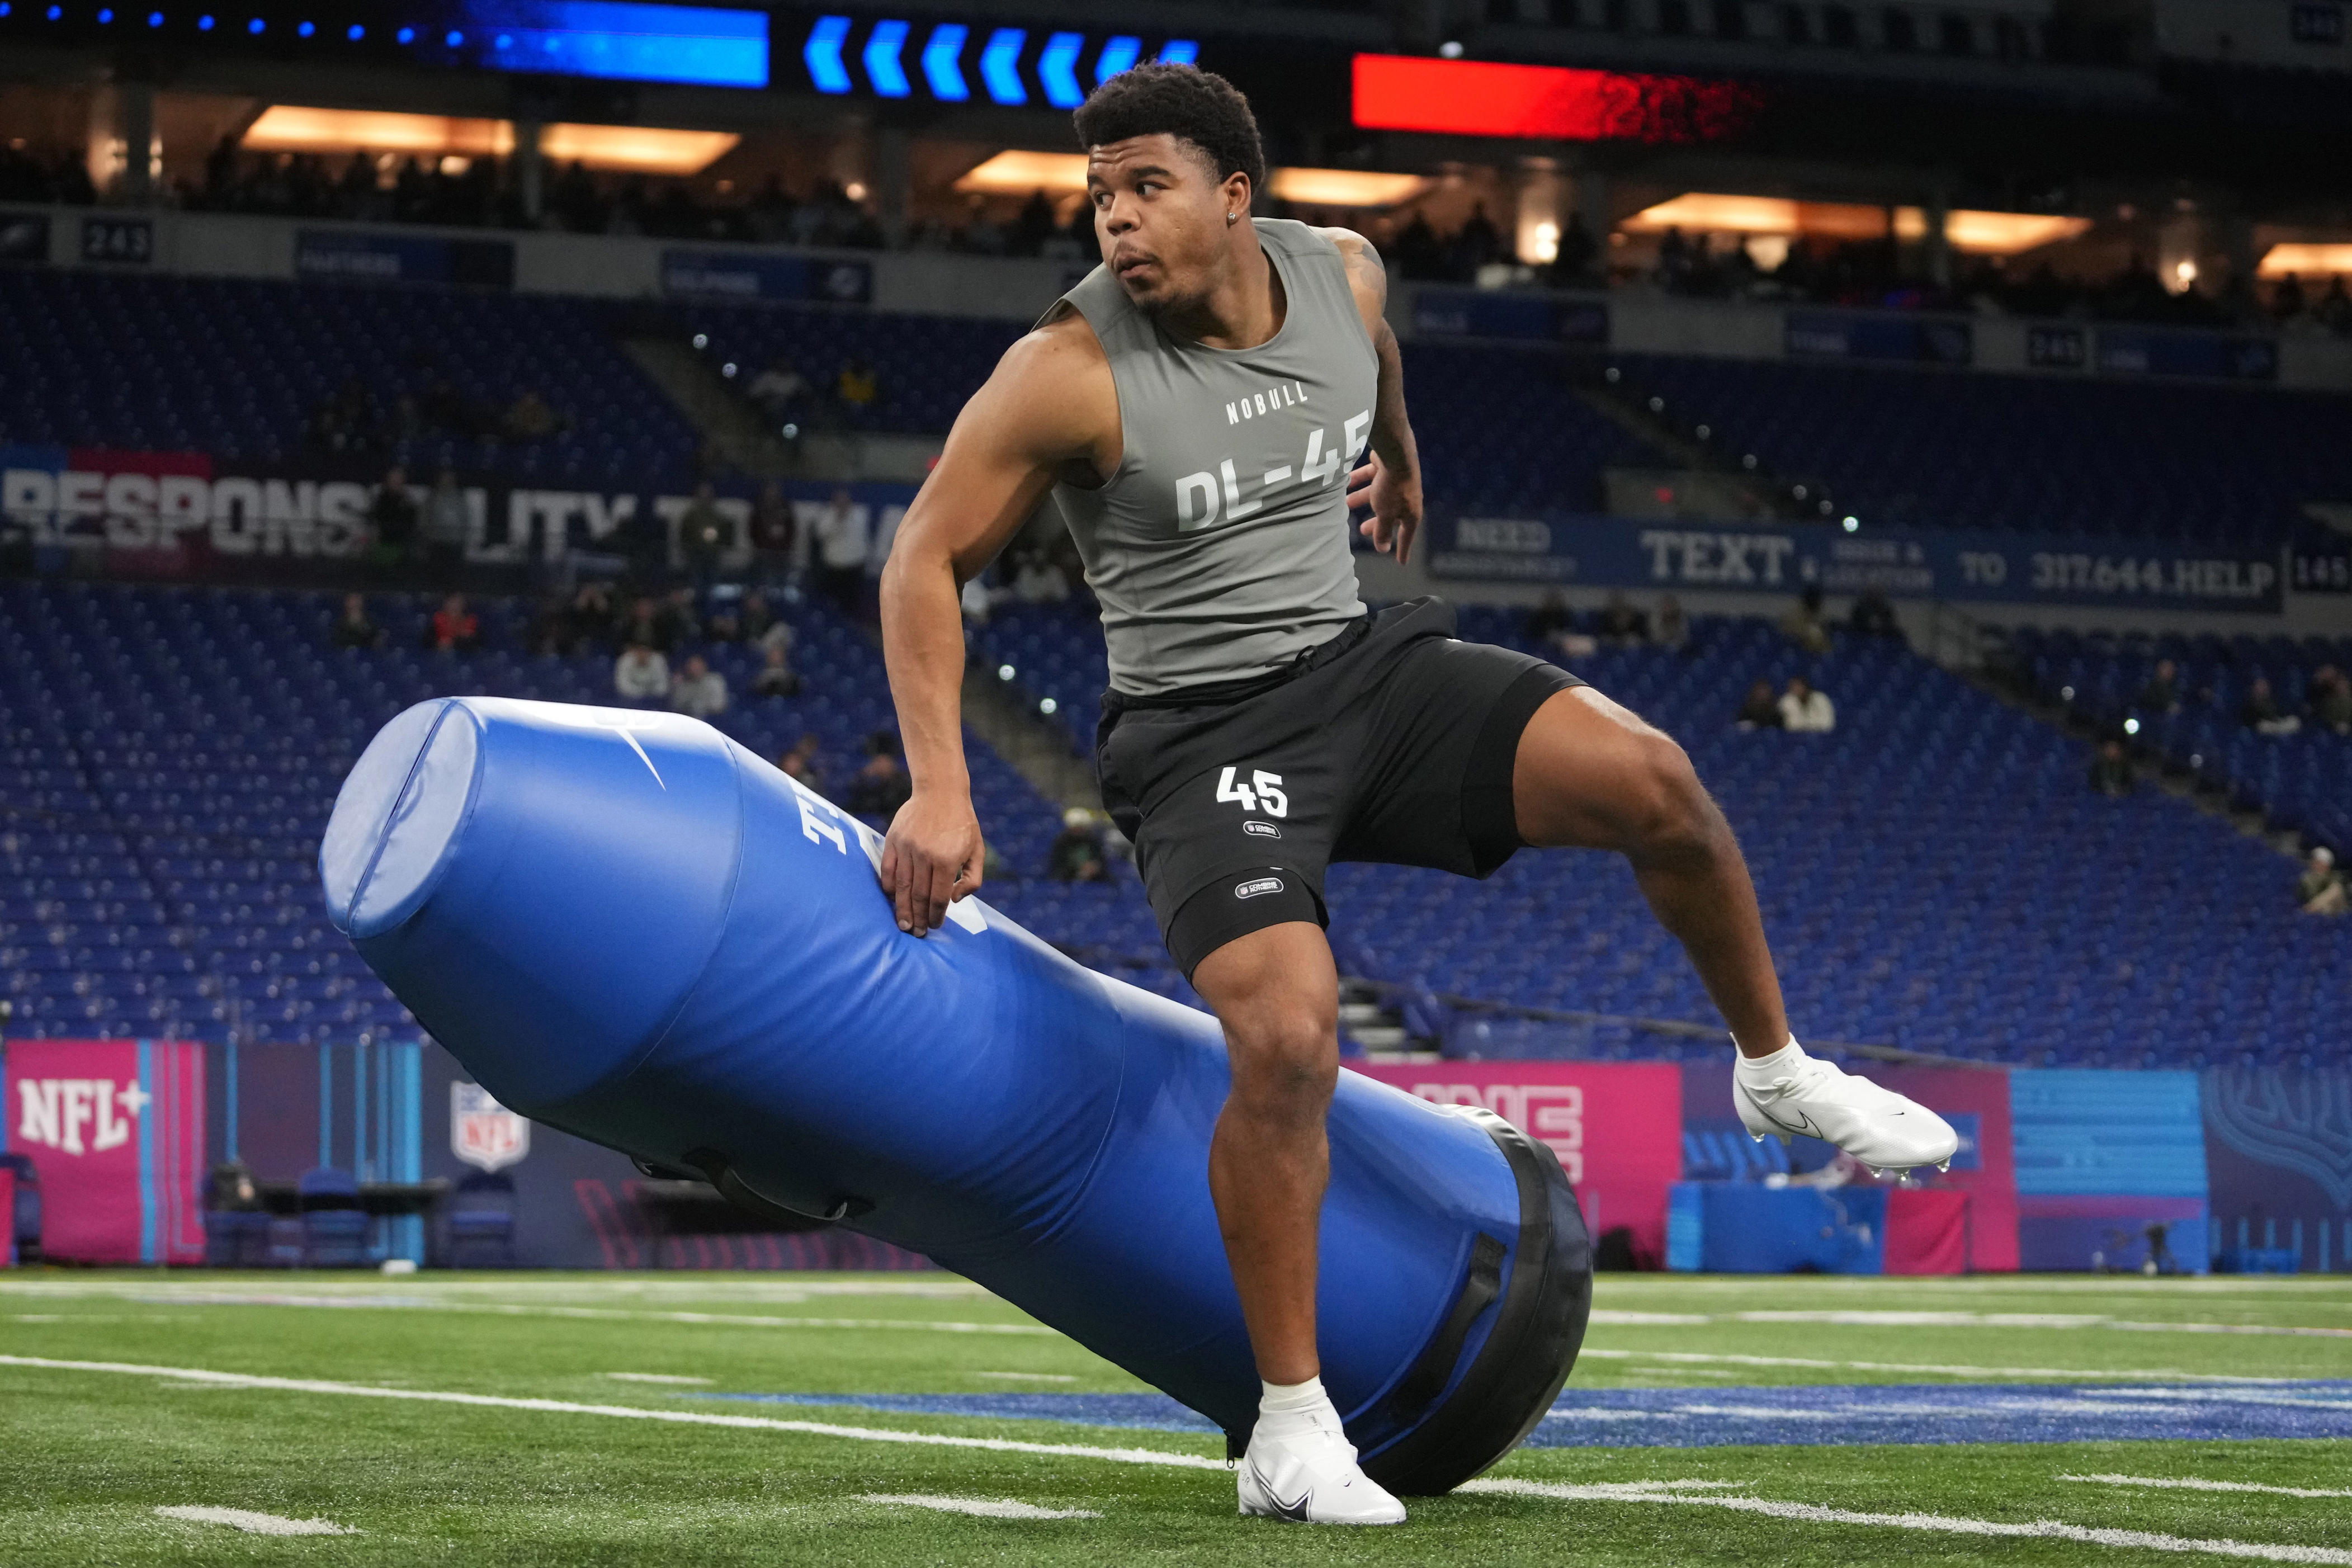 chop robinson nfl draft projections, according to latest expert mock drafts